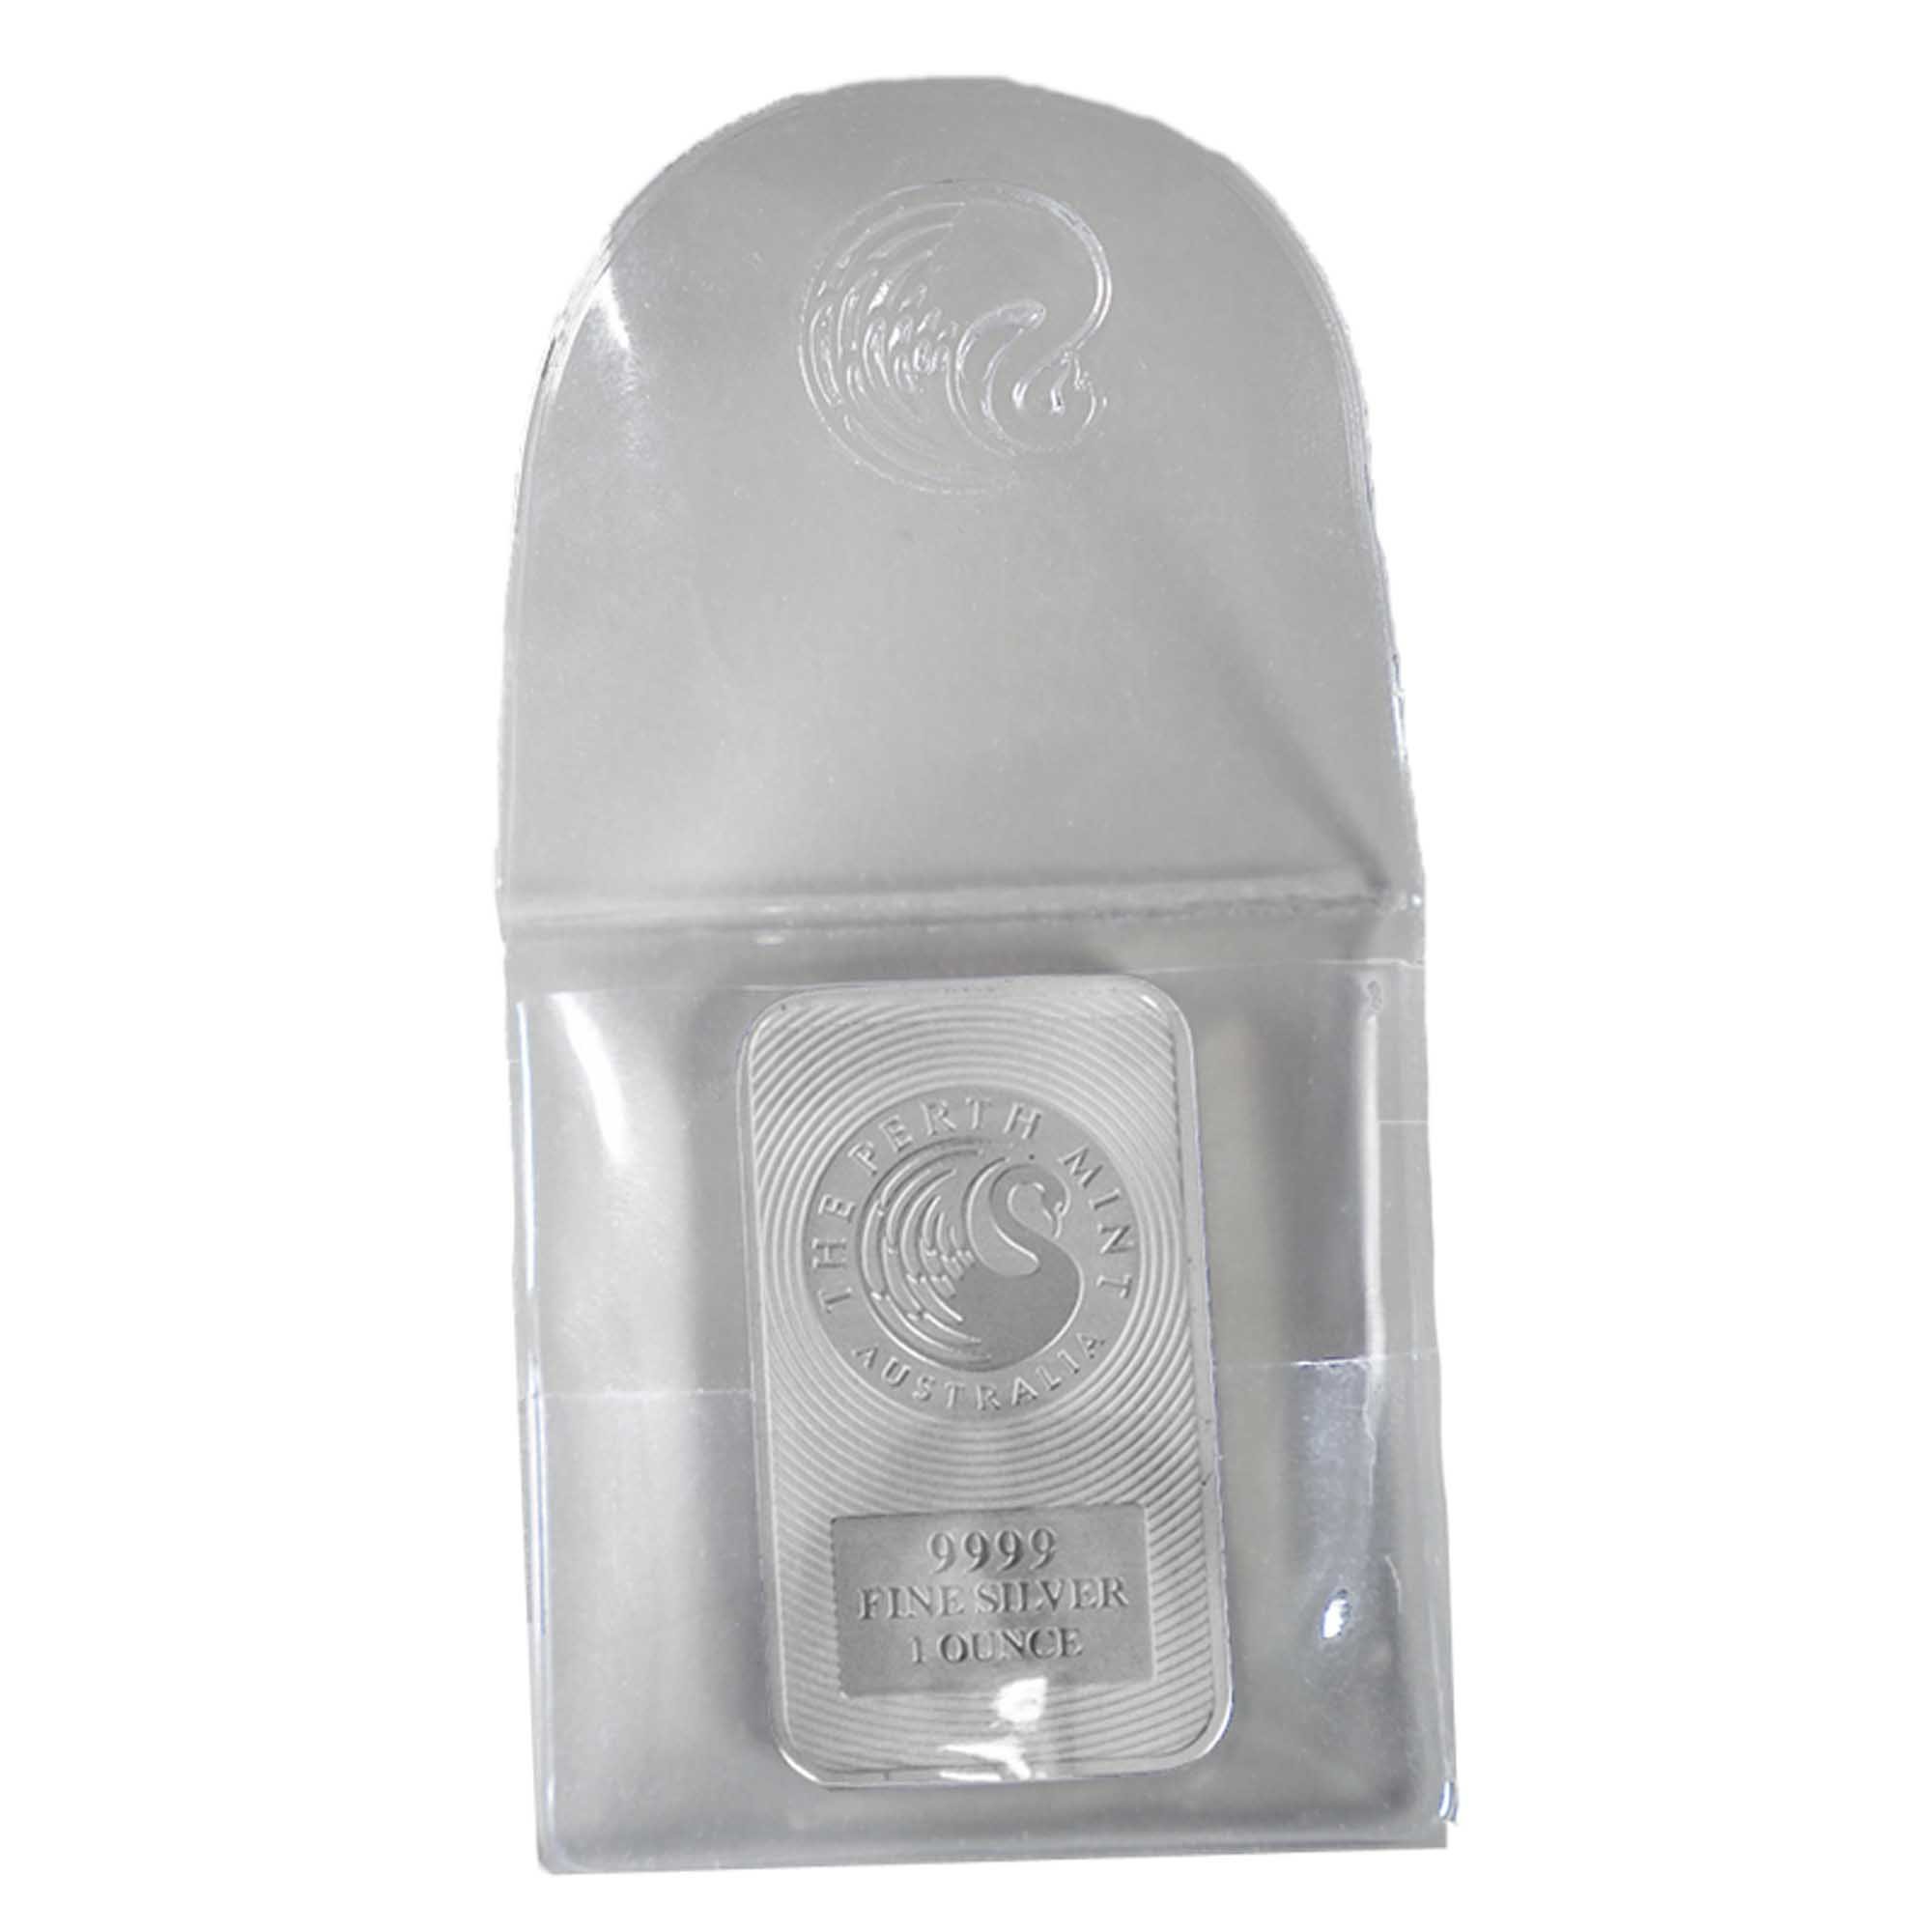 05 kangaroo minted bar in pouch 1oz silver InPouch